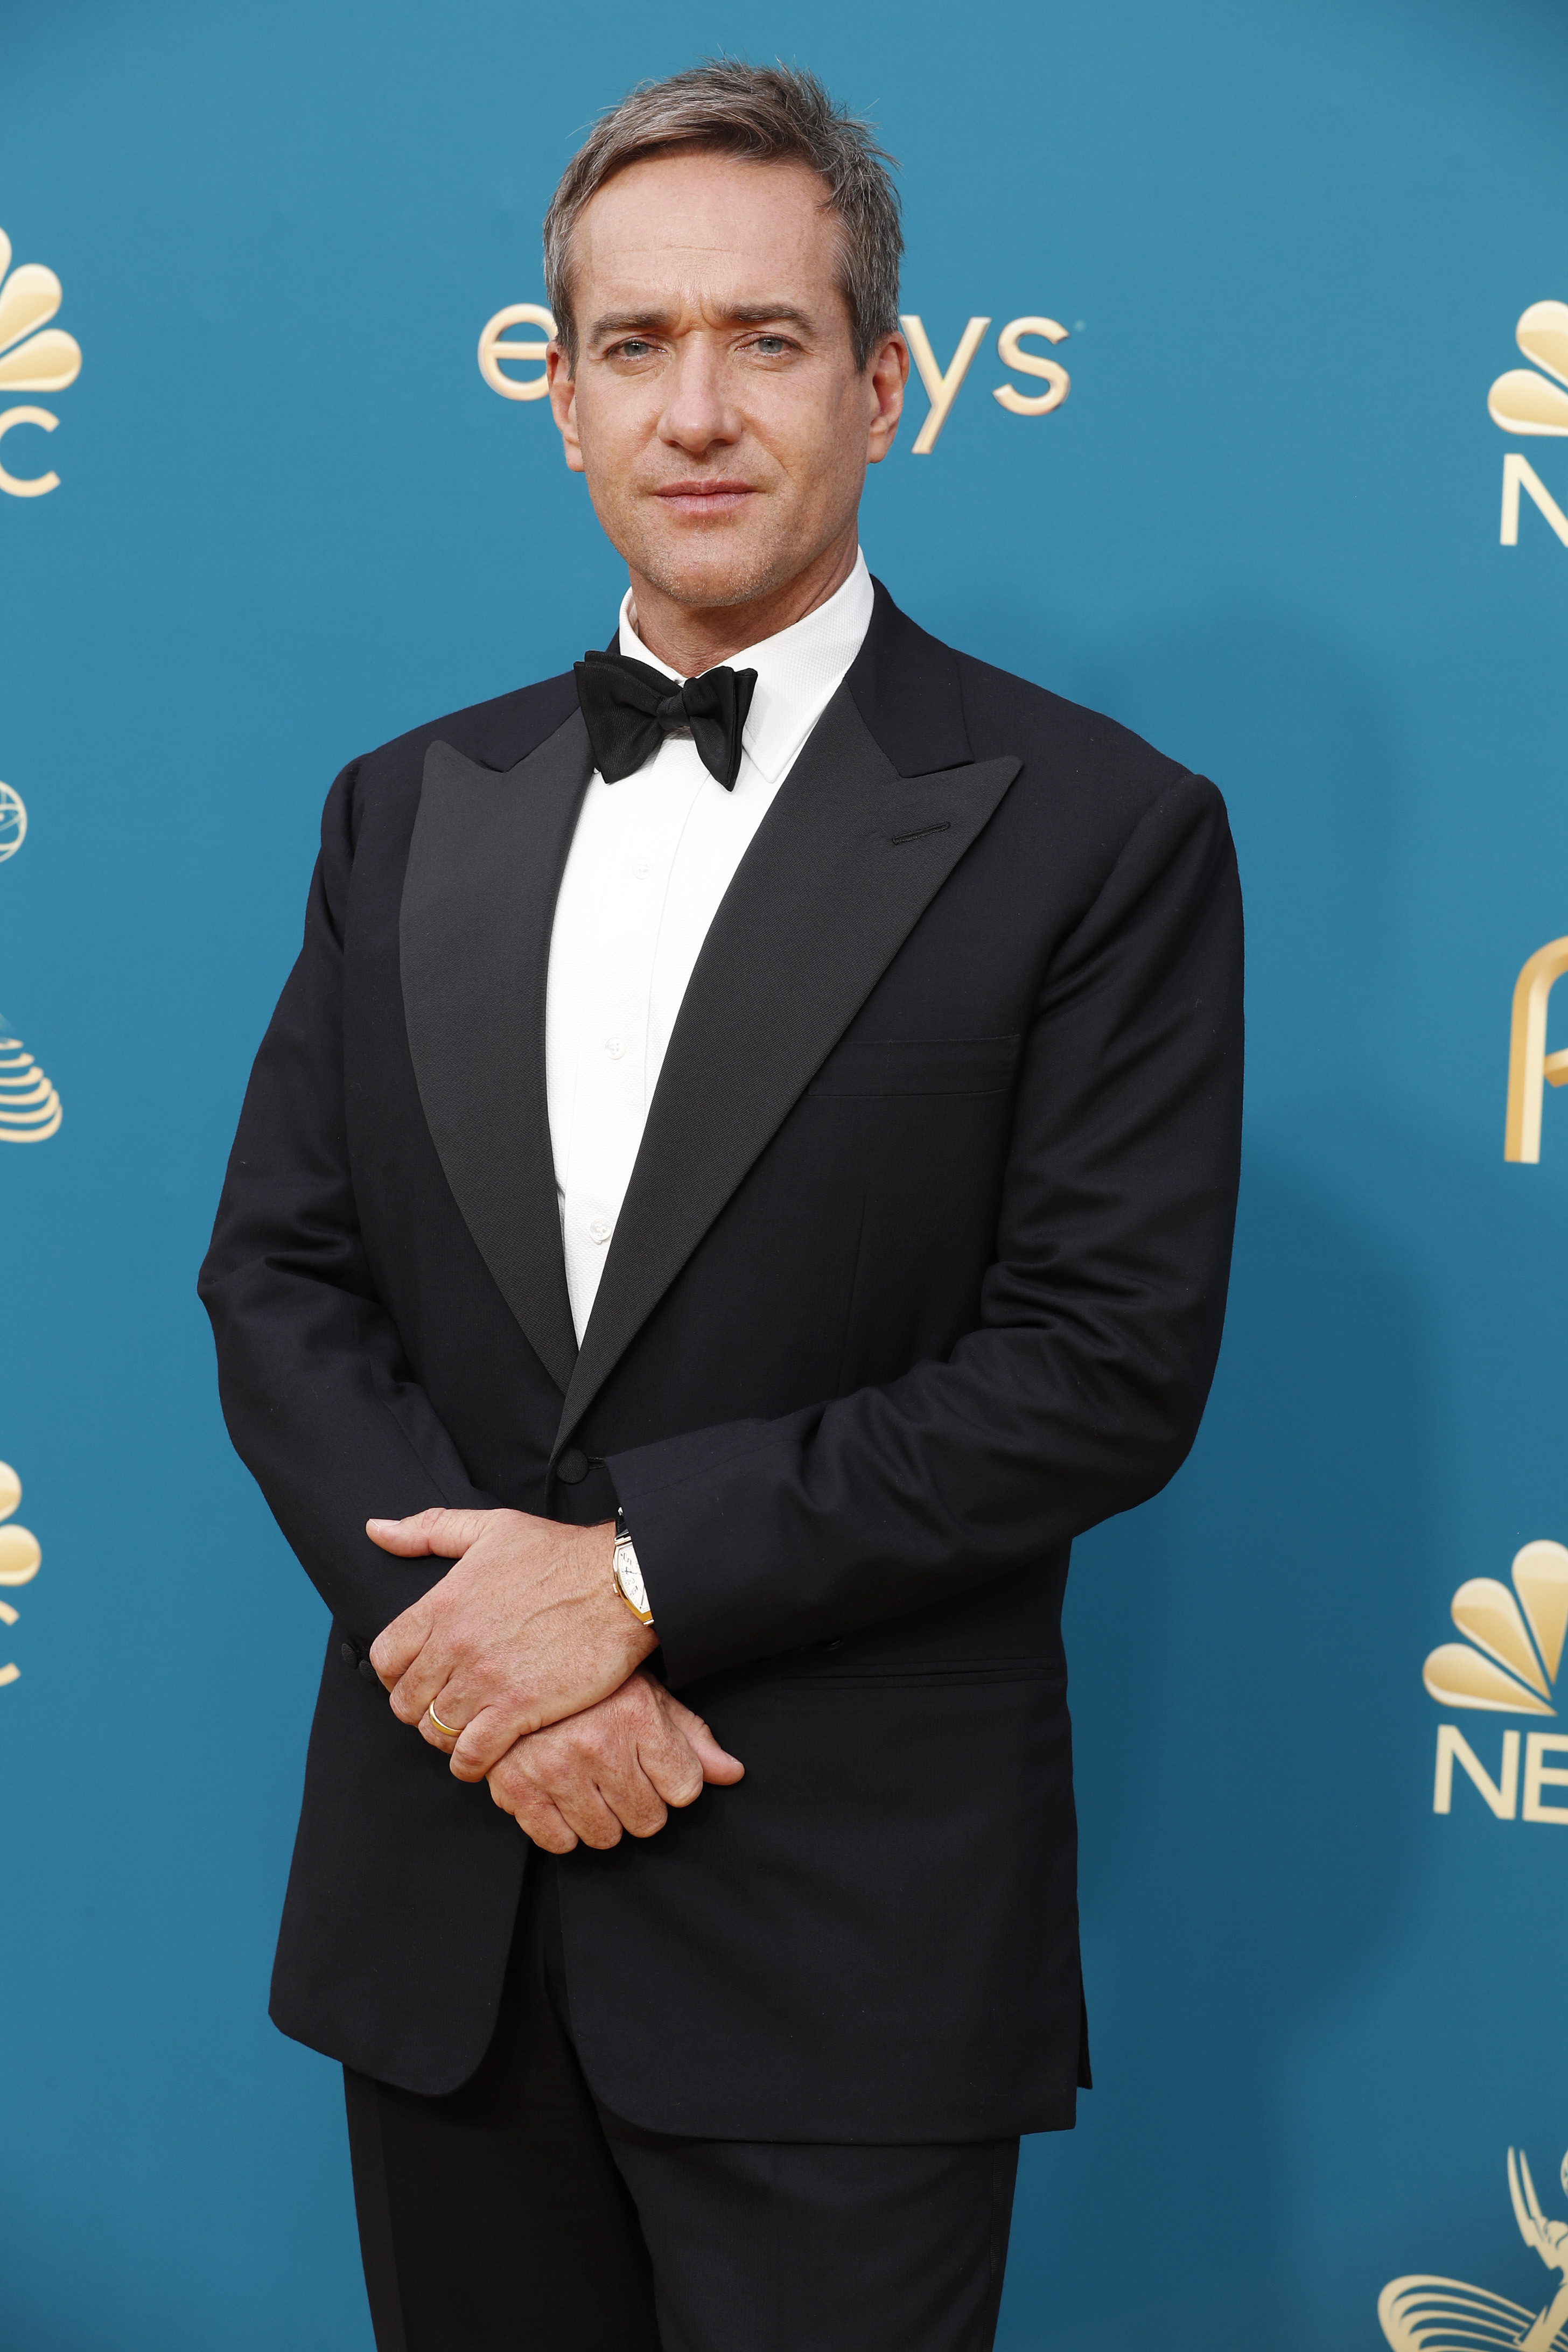 Matthew Macfadyen arrives to the 74th Annual Primetime Emmy Awards held at the Microsoft Theater on September 12, 2022, in Los Angeles, California | Source: Getty Images